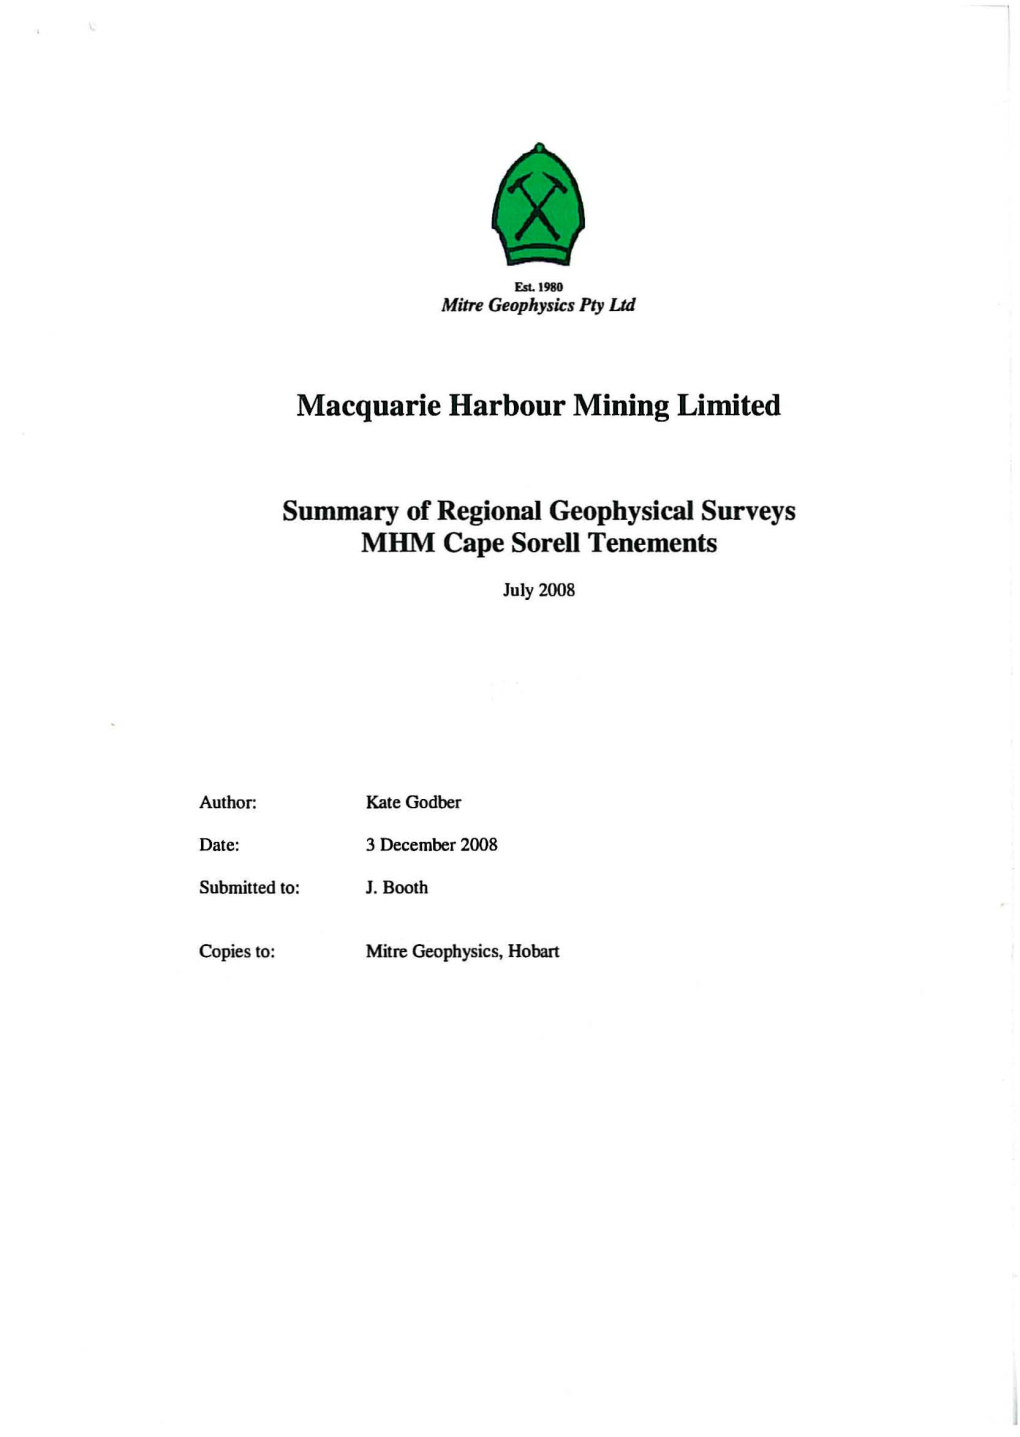 Macquarie Harbour Mining Limited